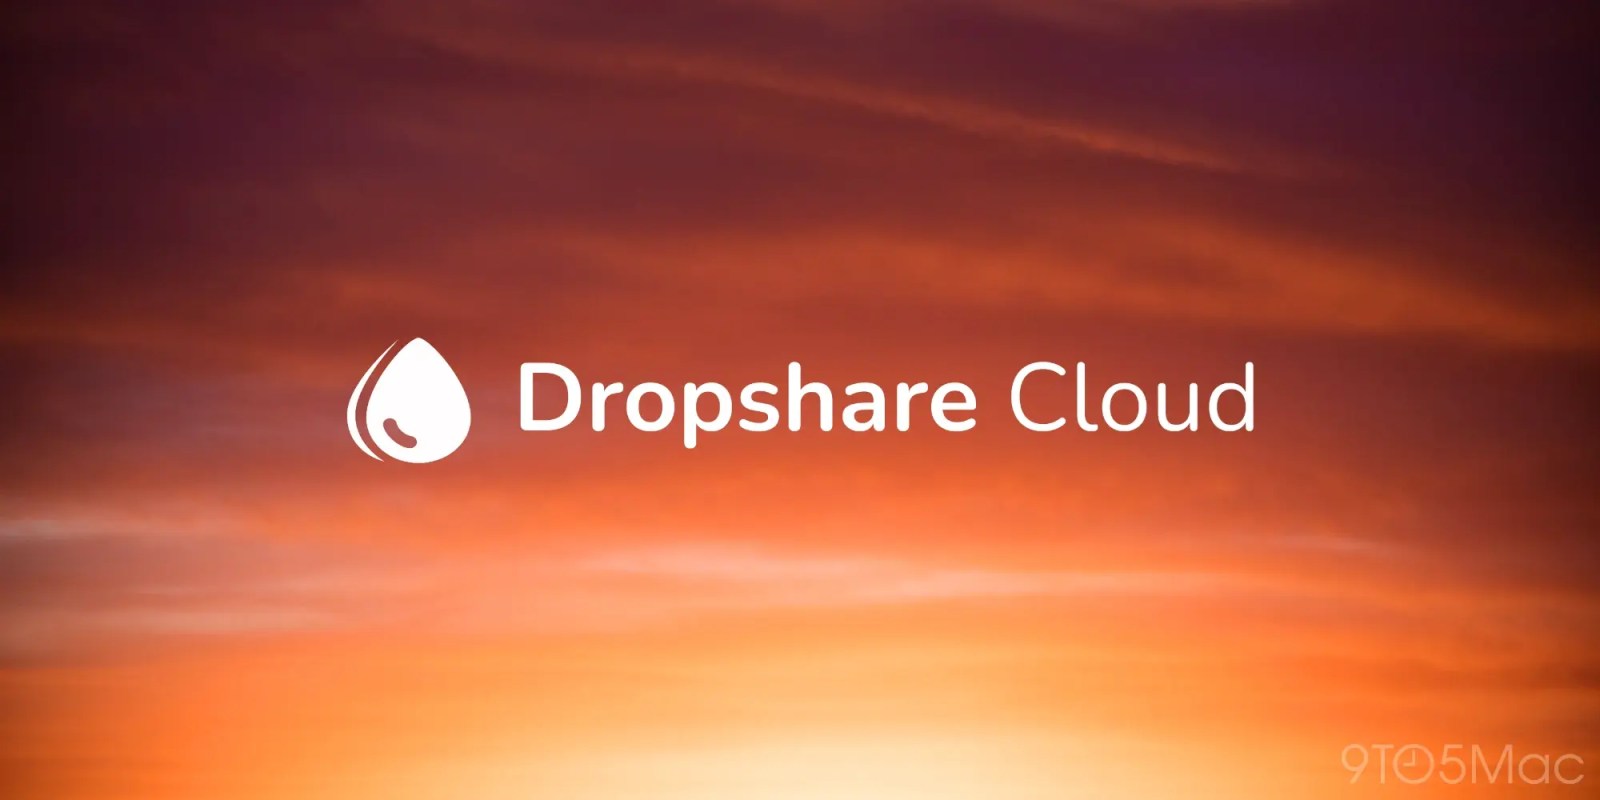 Dropshare to shut down its own cloud service later this month